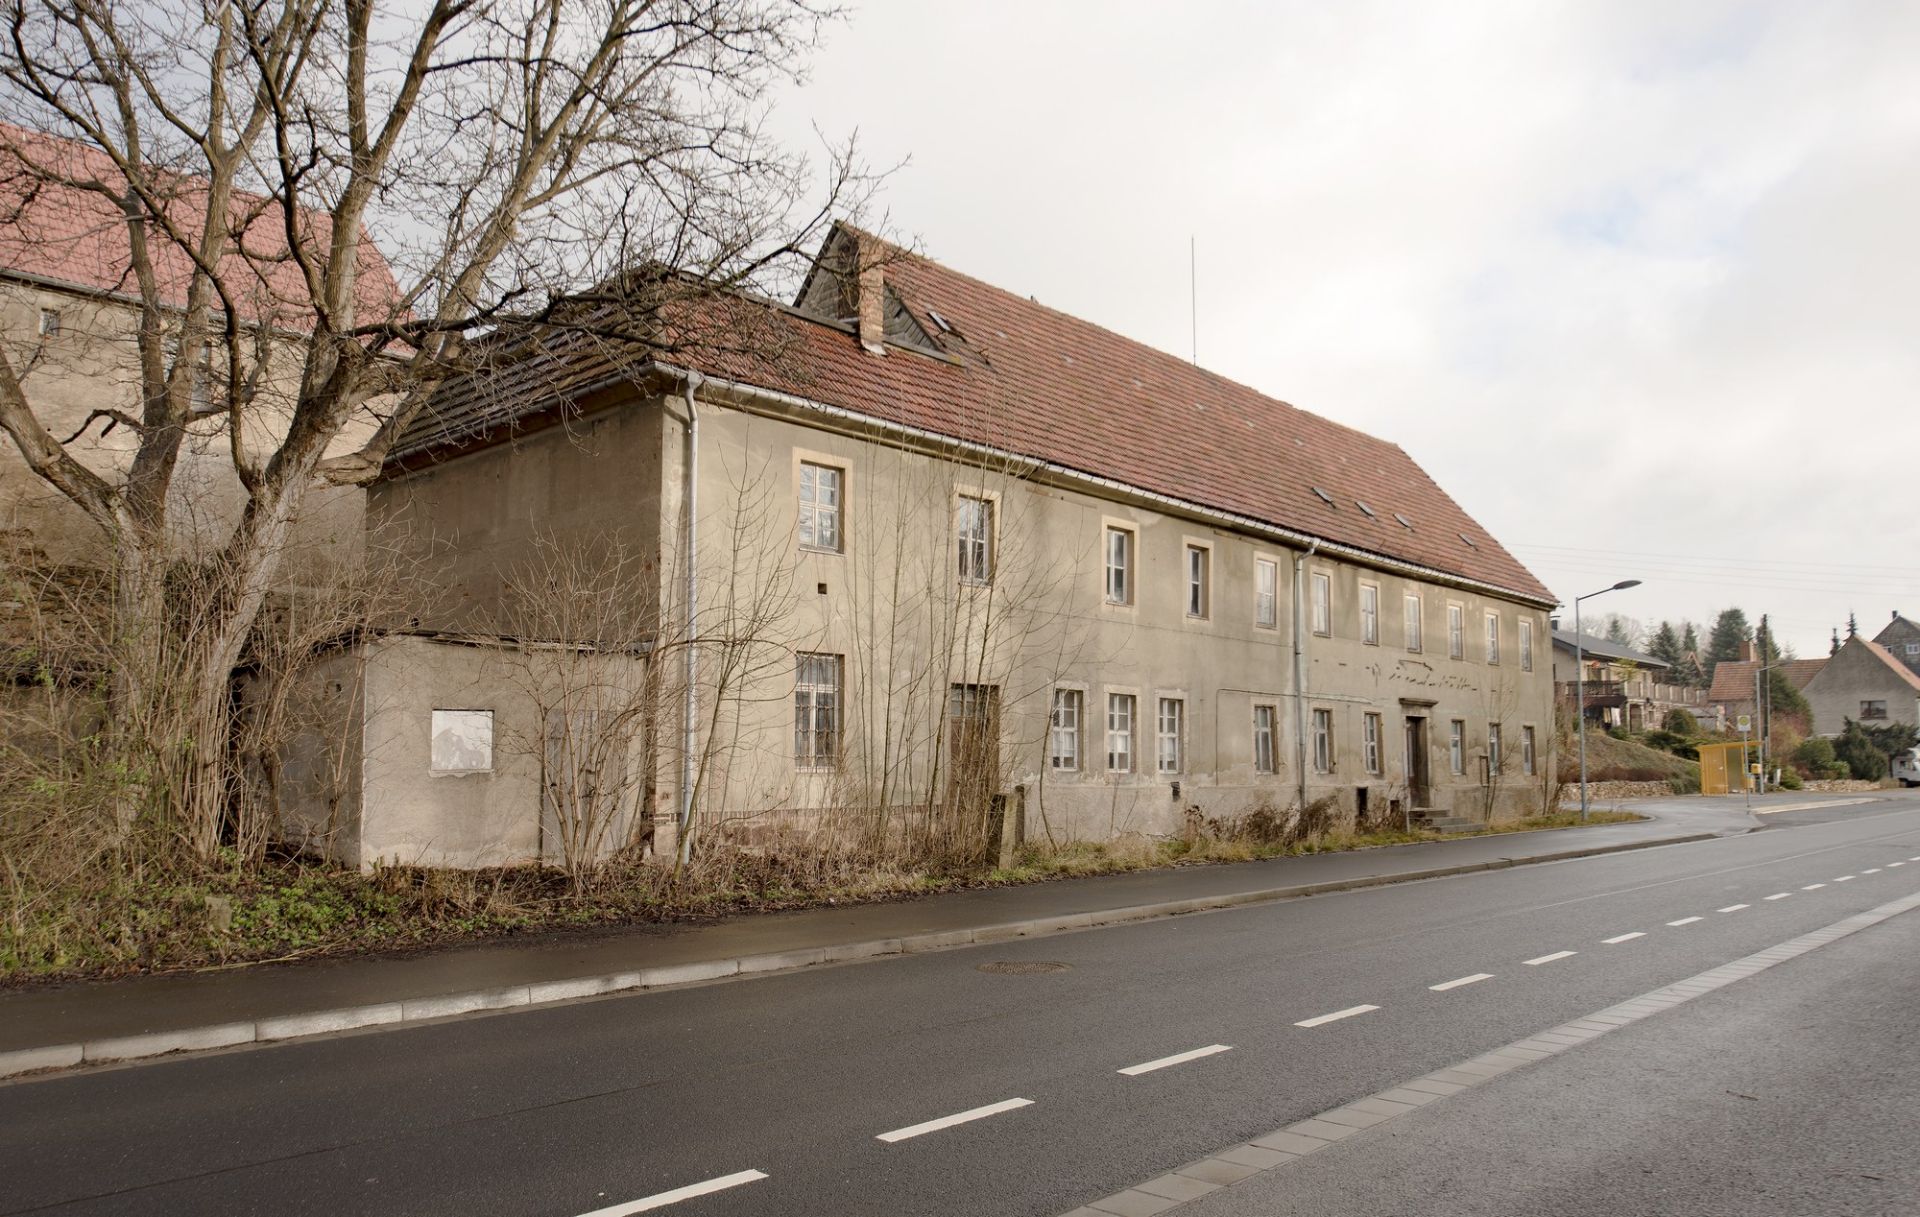 LARGE FORMER GUEST HOUSE IN NOSSEN, GERMANY - Image 5 of 47